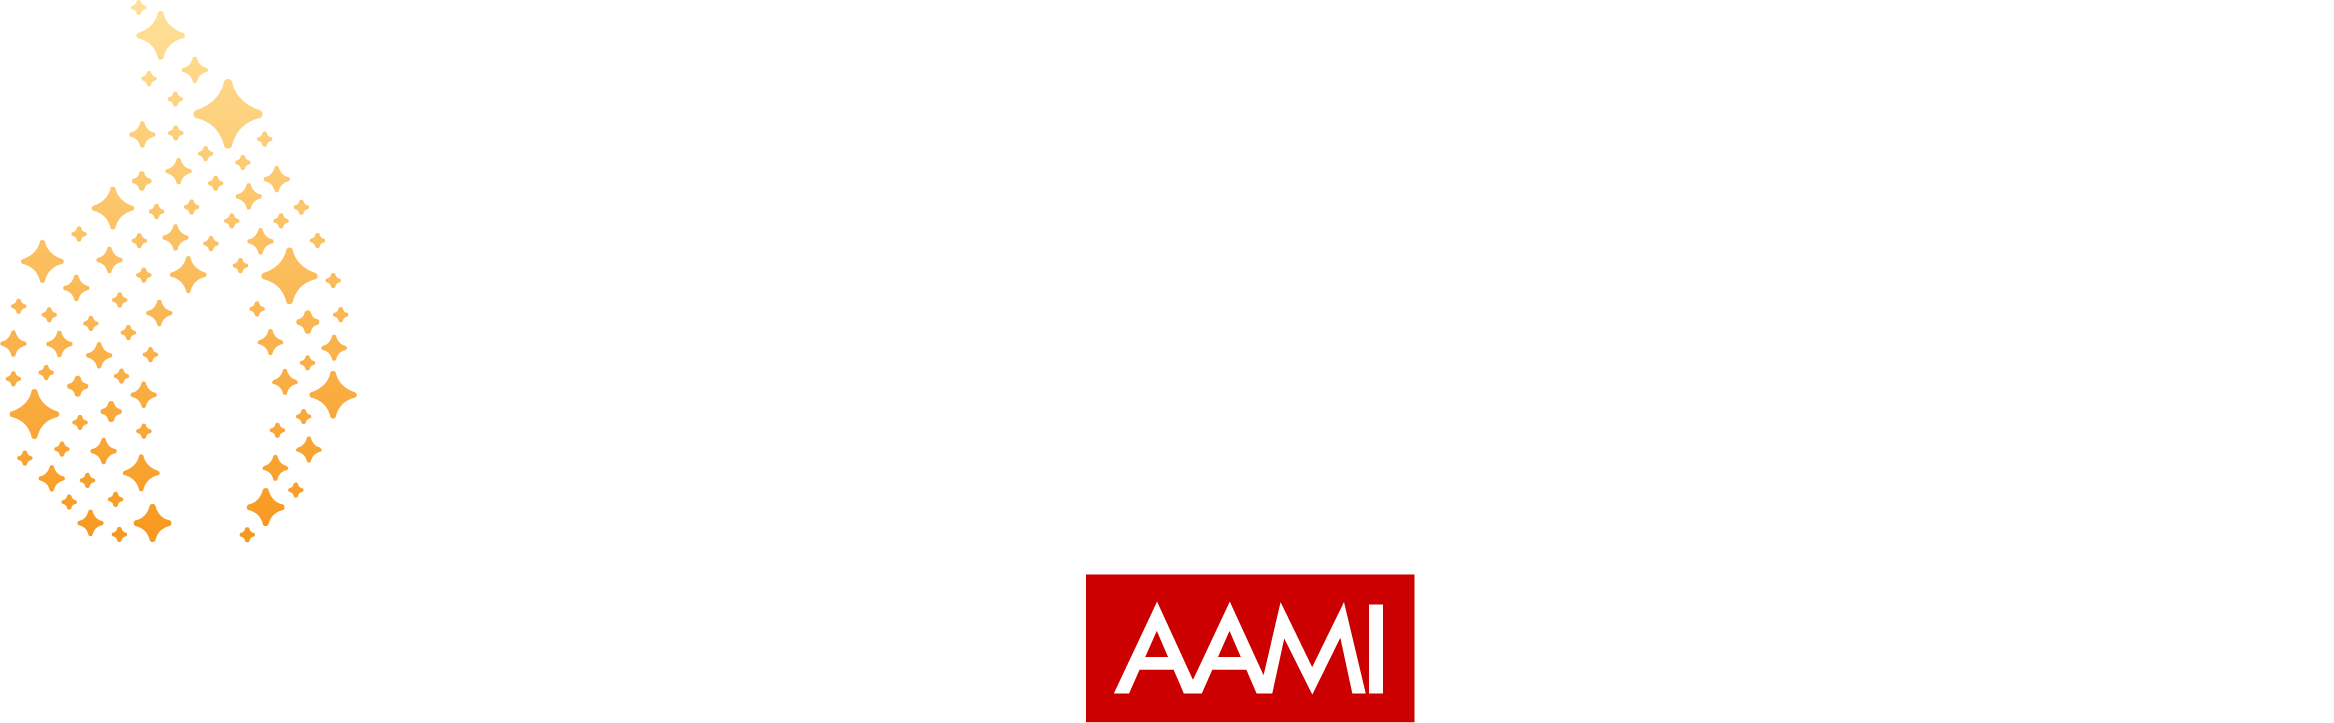 Home - Vision Australia's Carols by Candlelight. Presented by AAMI - logo